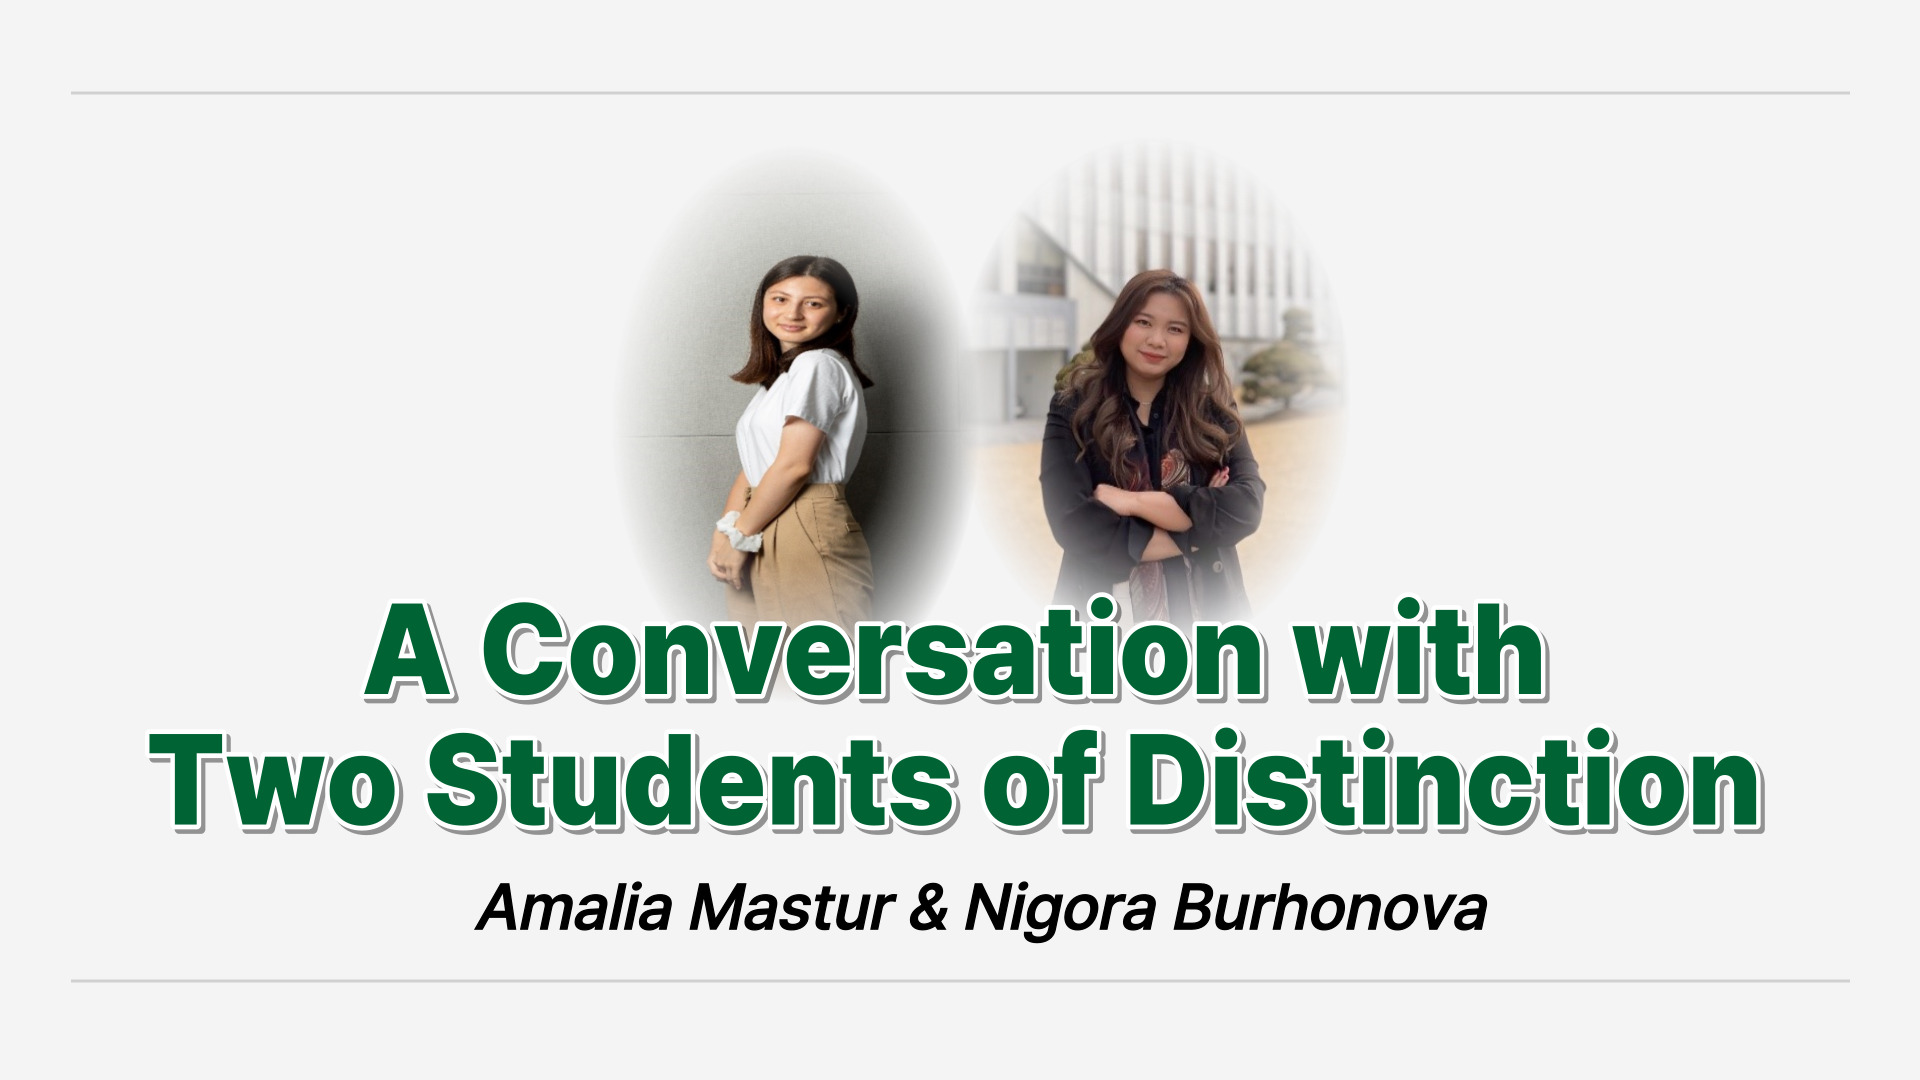 A Conversation with Two Students of Distinction